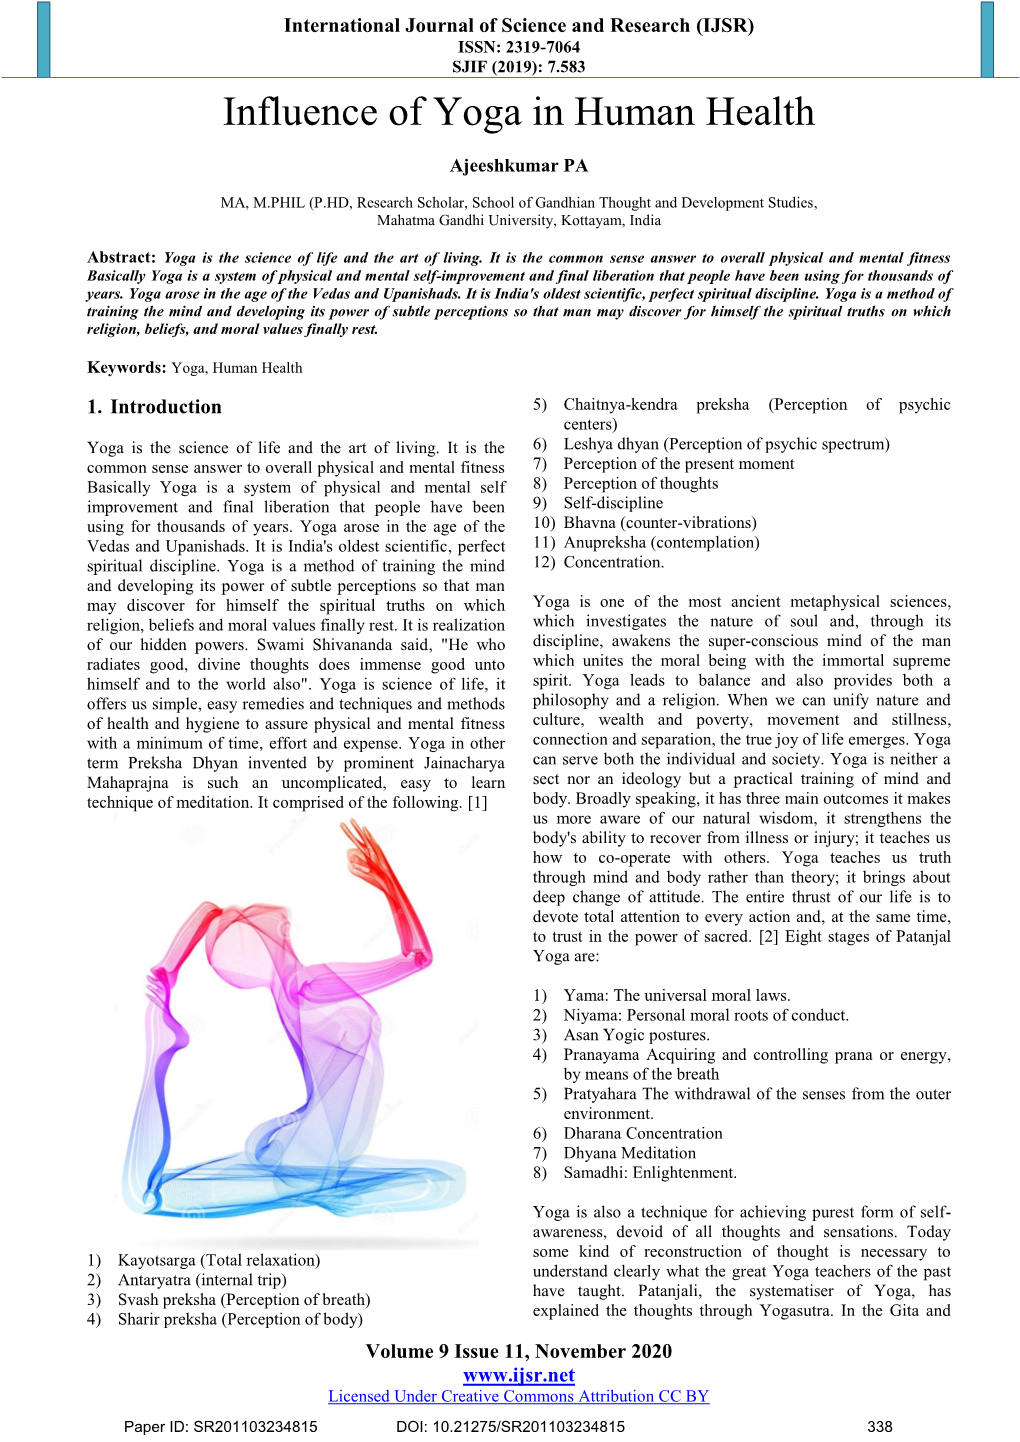 Influence of Yoga in Human Health